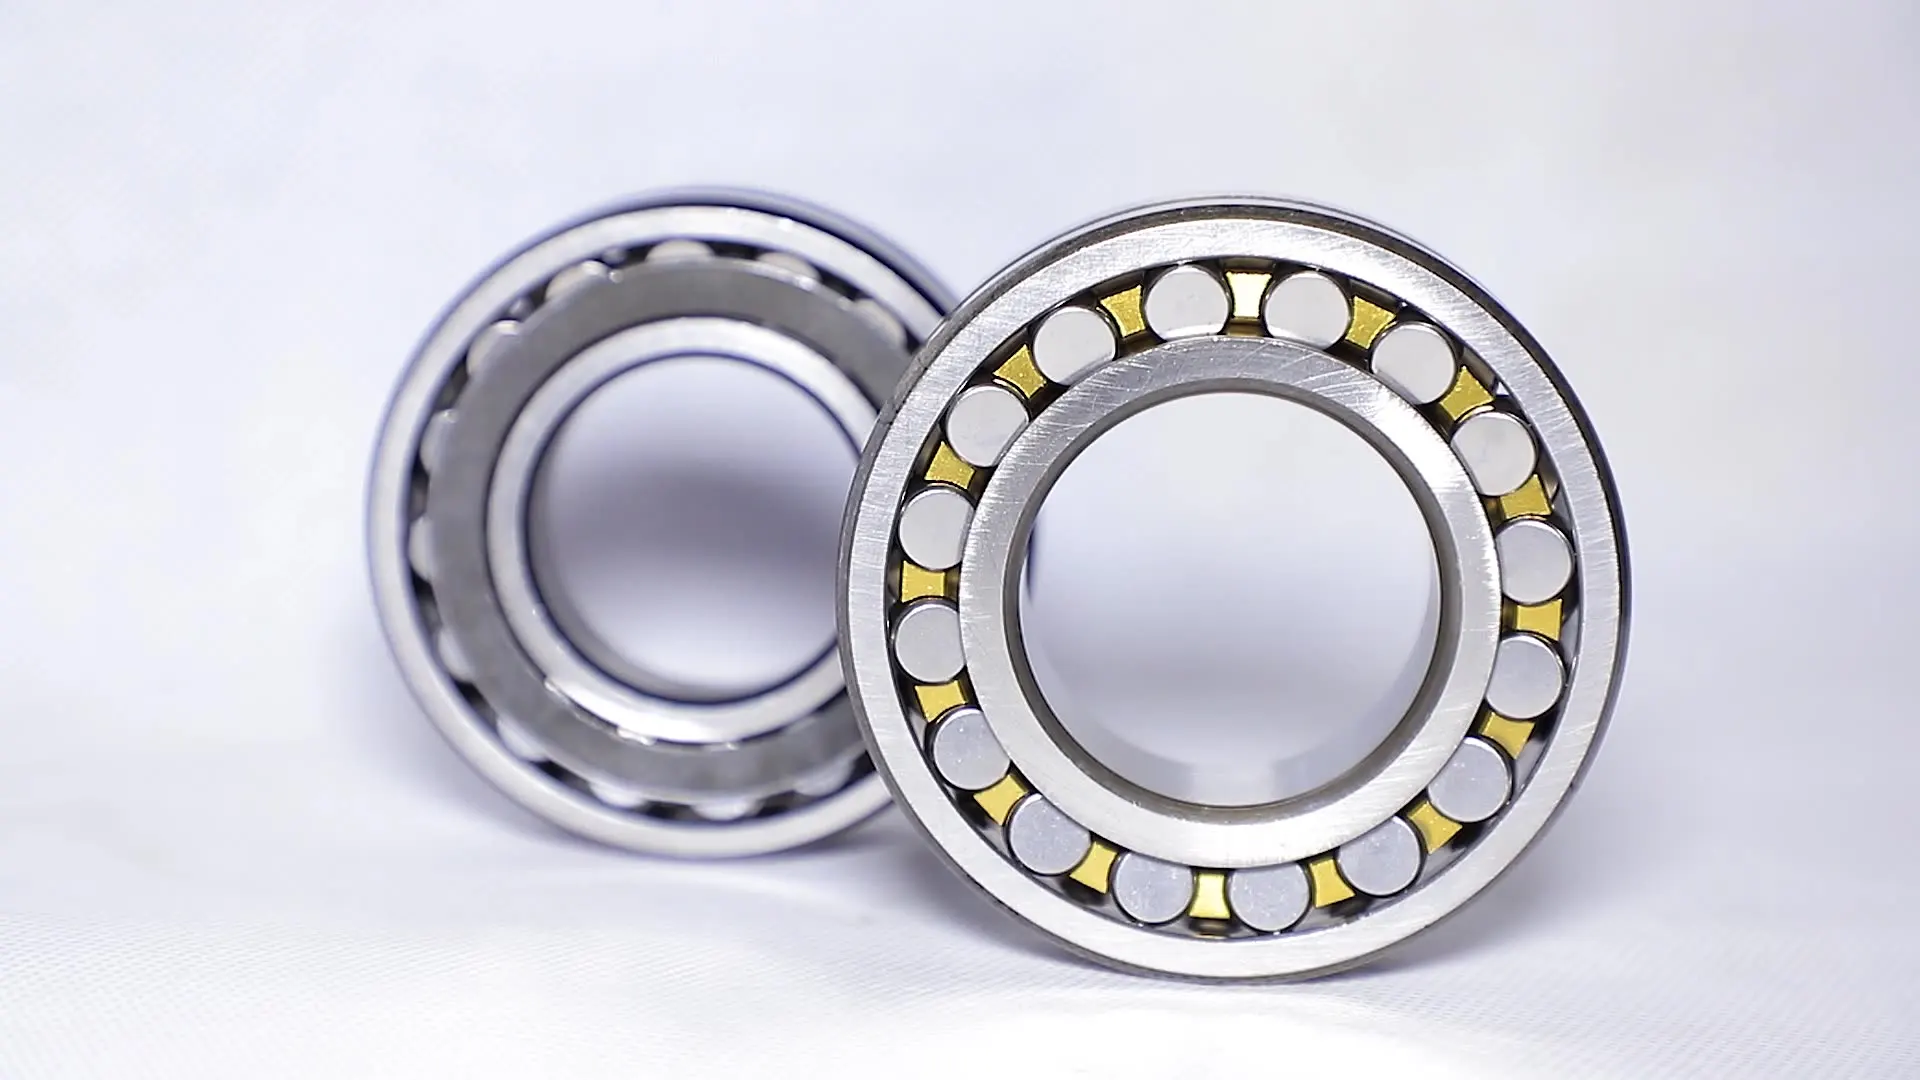 

NN 3076 Mk/w33high Quality Cylindrical Roller Bearings 380x560x135mmoem Excellent Quality Double ROW P0 P6 P5 P4 Z1 Z2 Z3 Z4 OEM